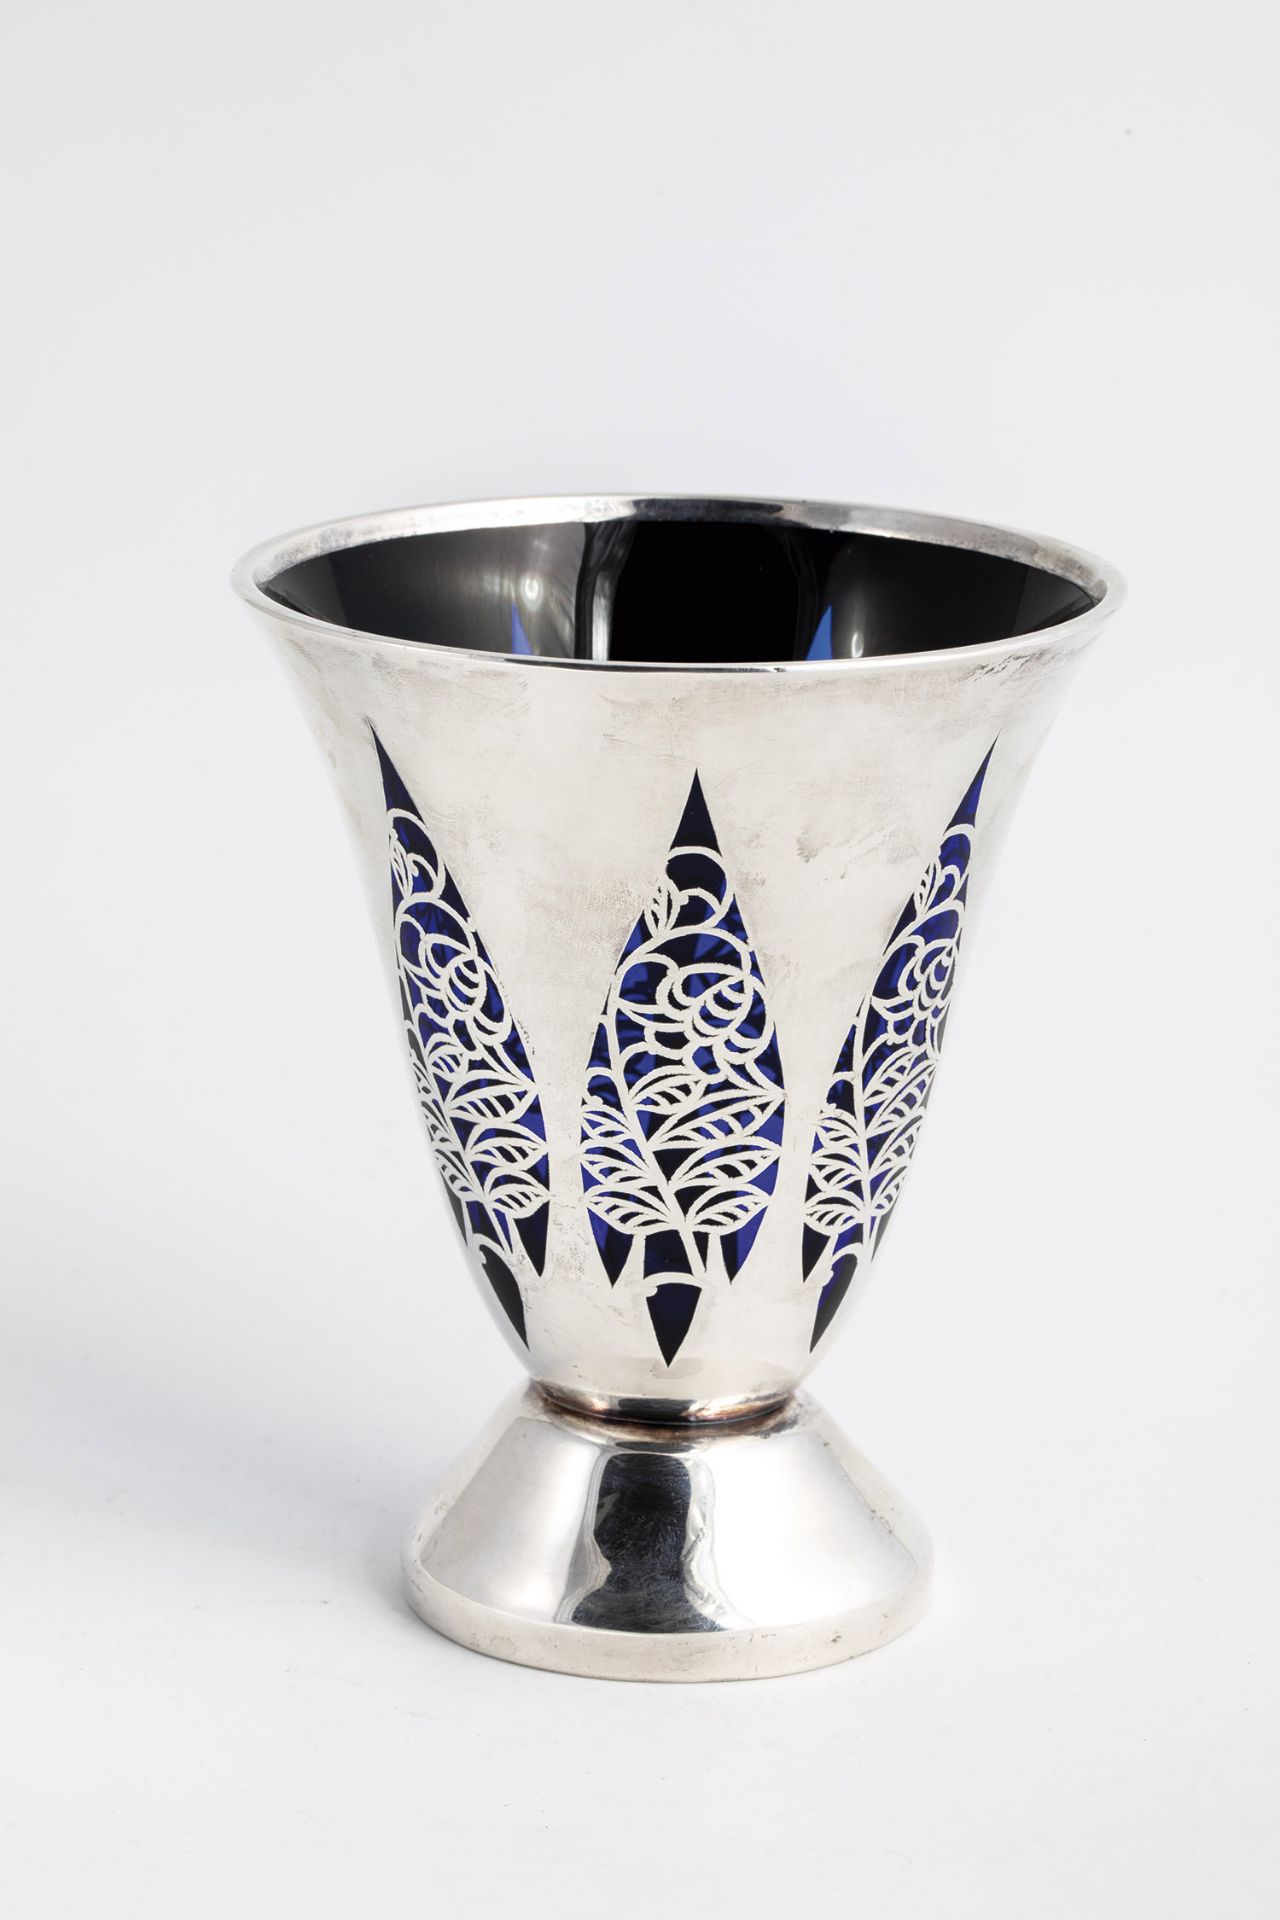 Vase with galvanized fine silver decoration Wohl Jean Beck, Munich, ca. 1925 Cobalt blue glass, with